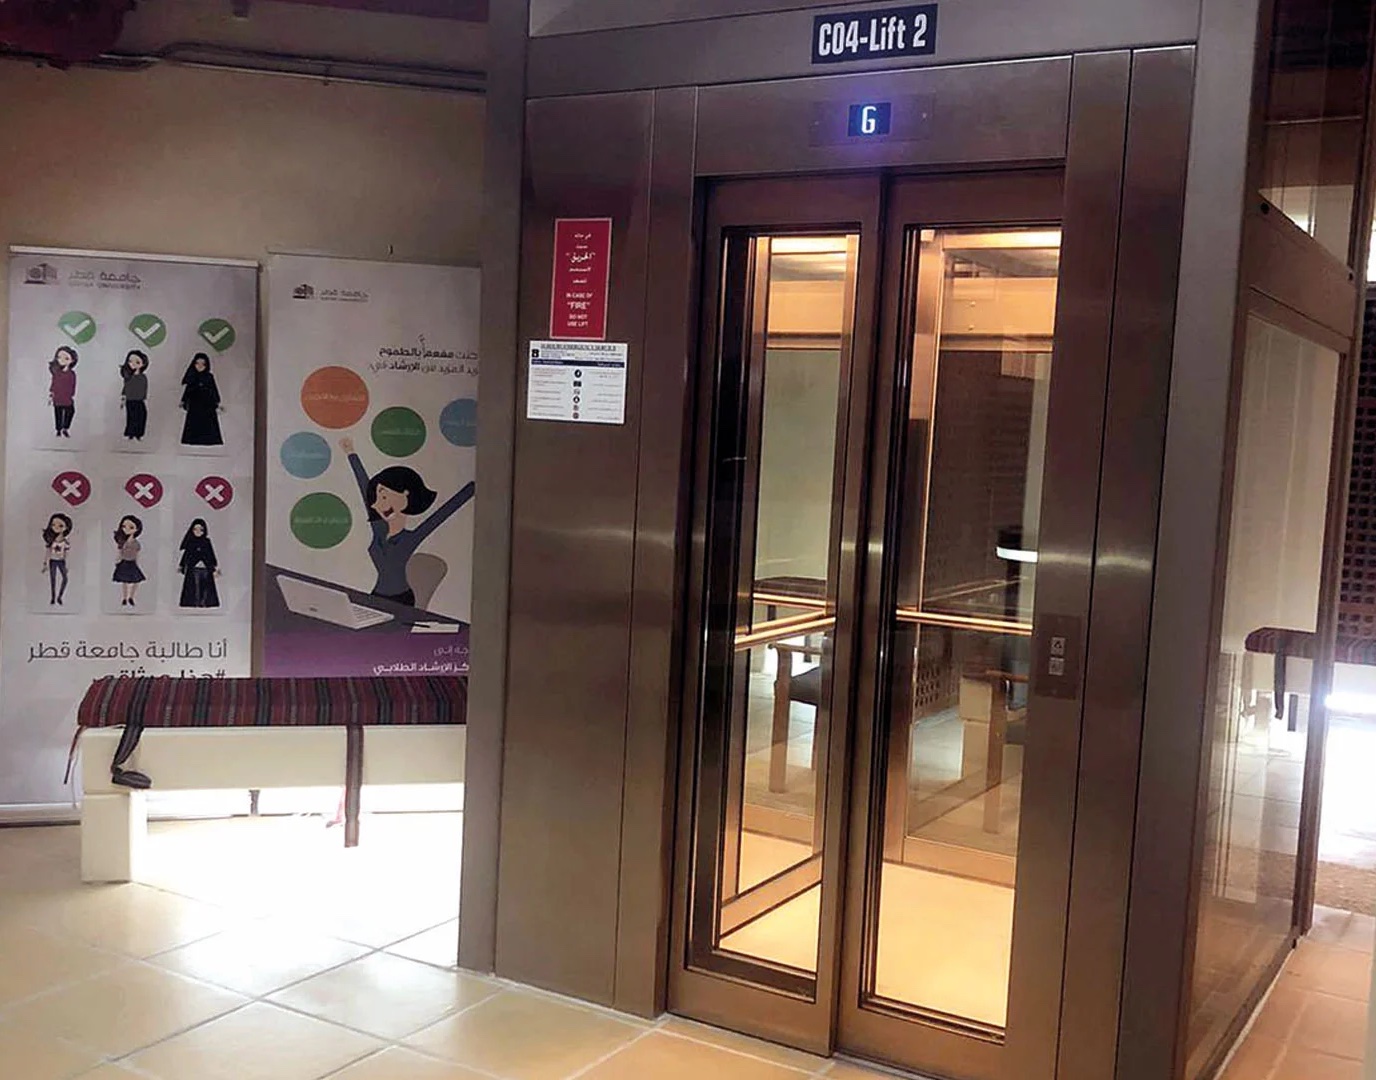 Installing Elevators for people with disabilities at the university